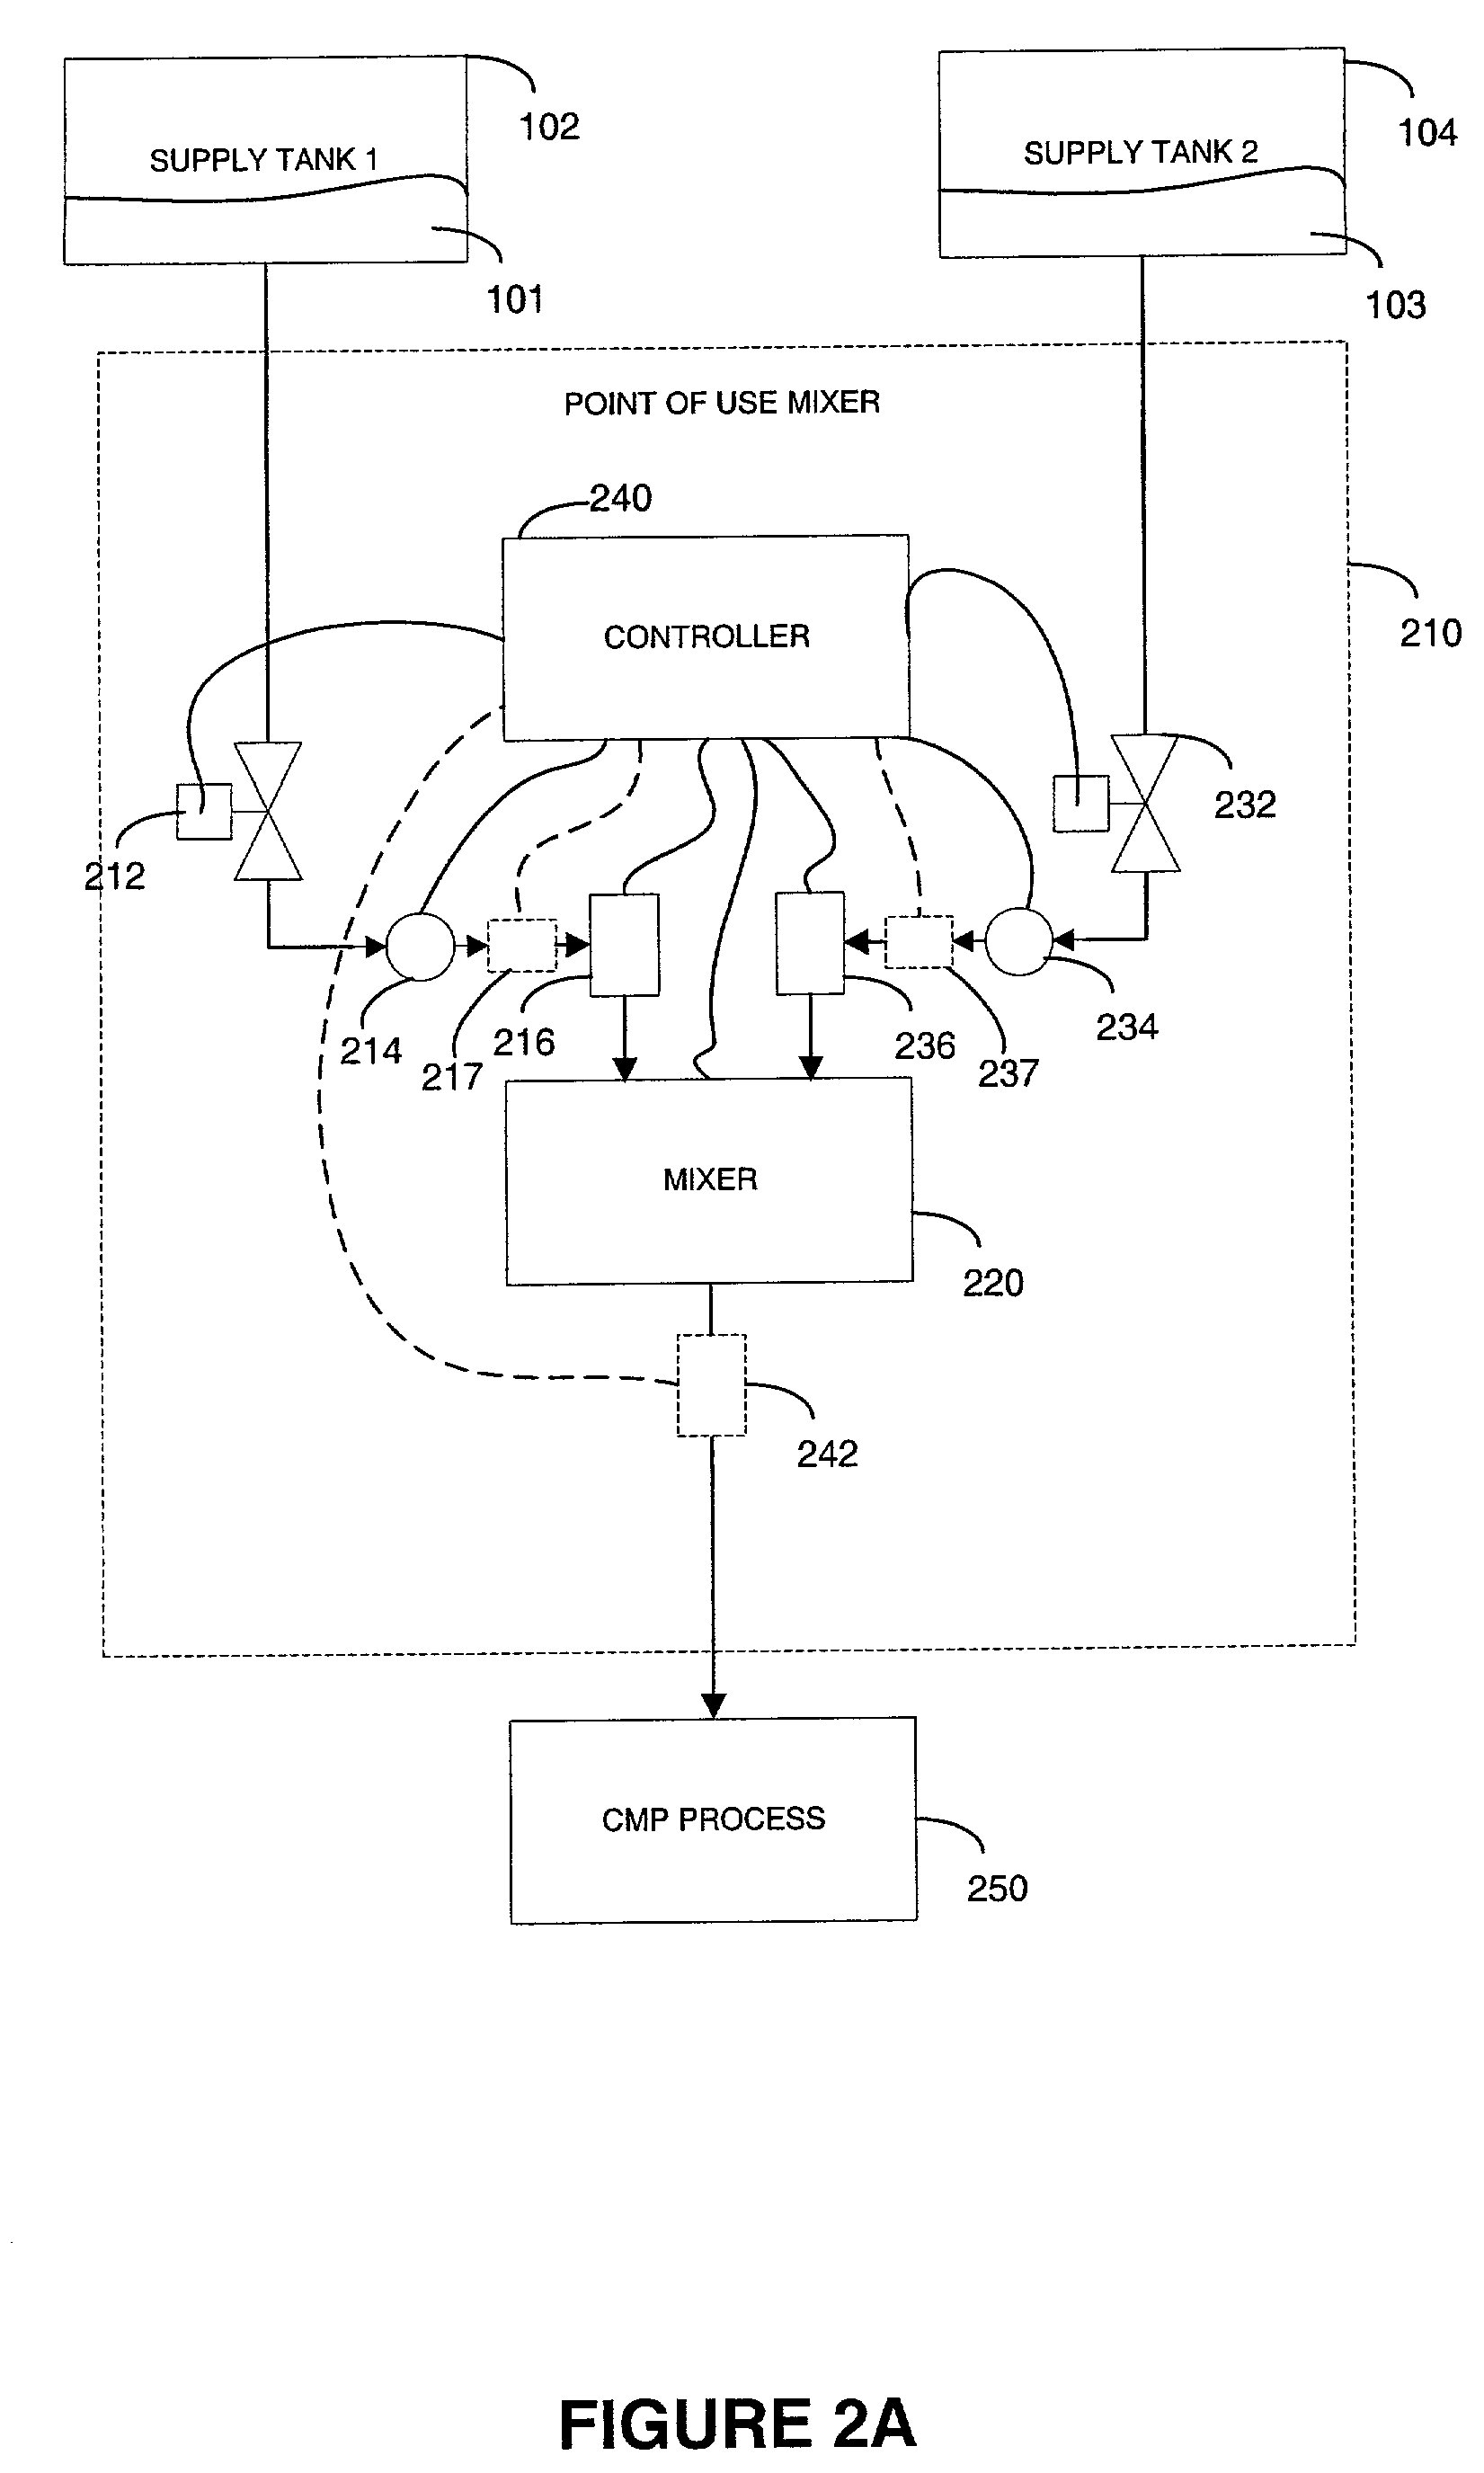 System and method for point of use delivery, control and mixing chemical and slurry for CMP/cleaning system